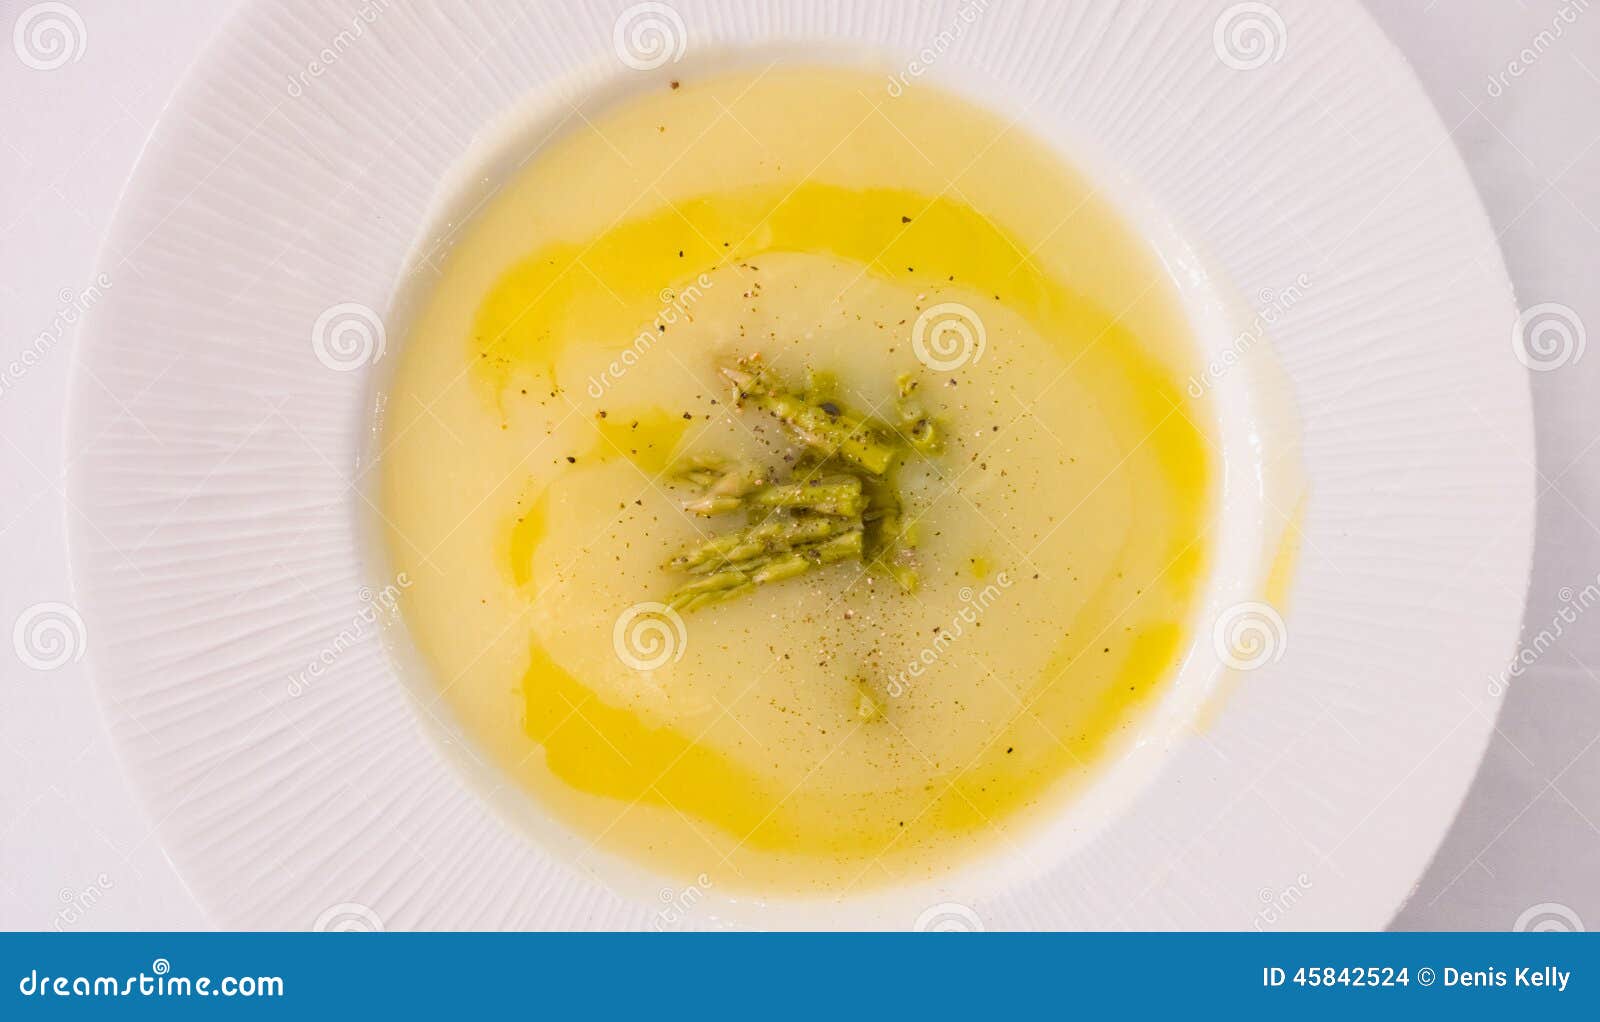 Asparagus Cream Soup stock photo. Image of vegetable - 45842524